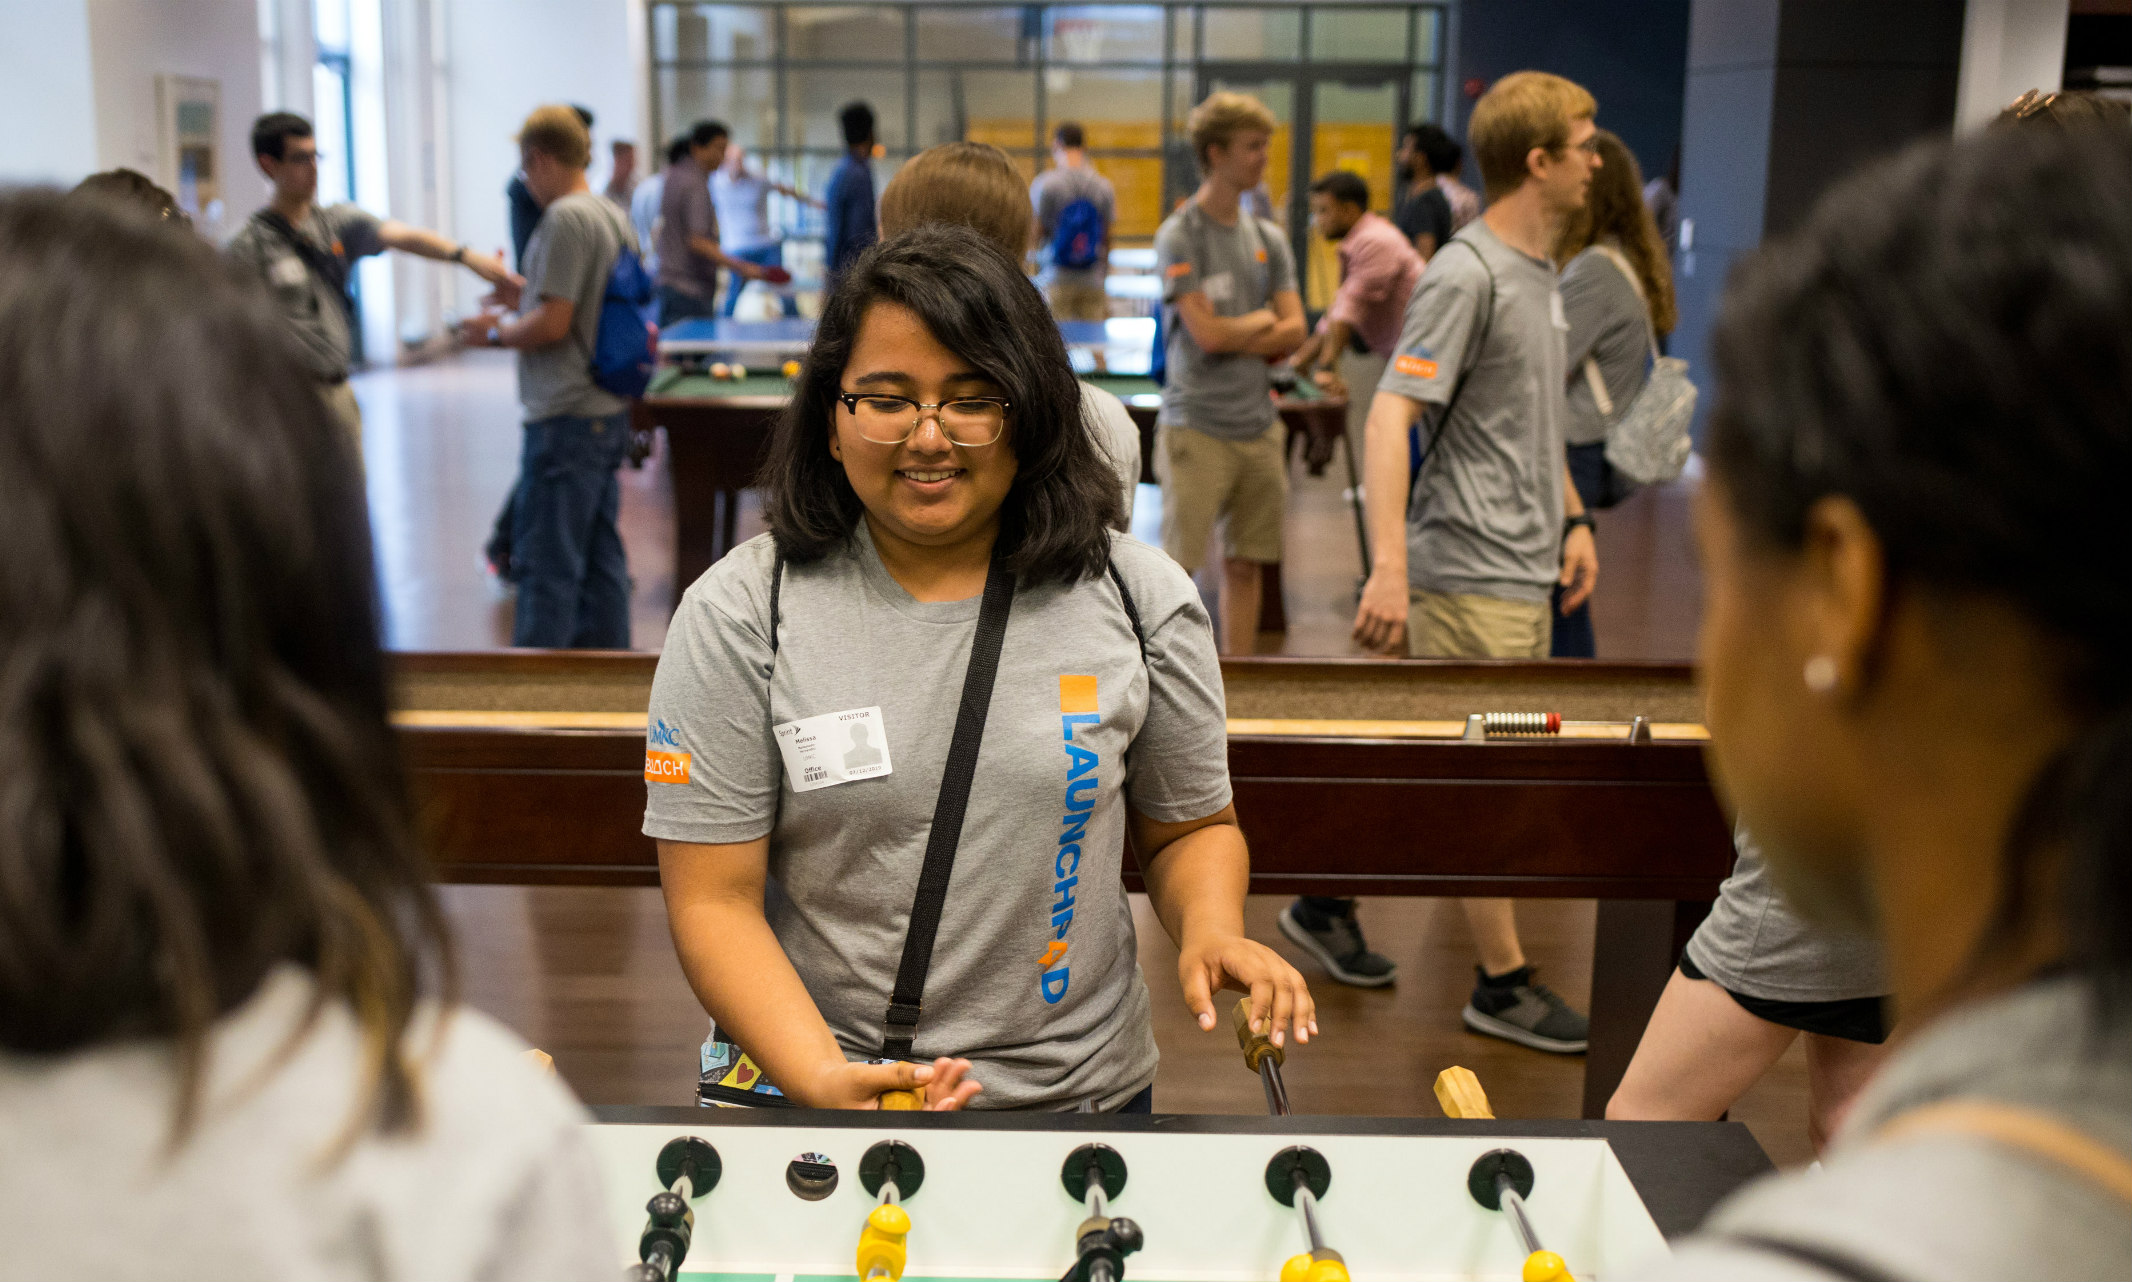 Foosball game at Bloch Launchpad student event